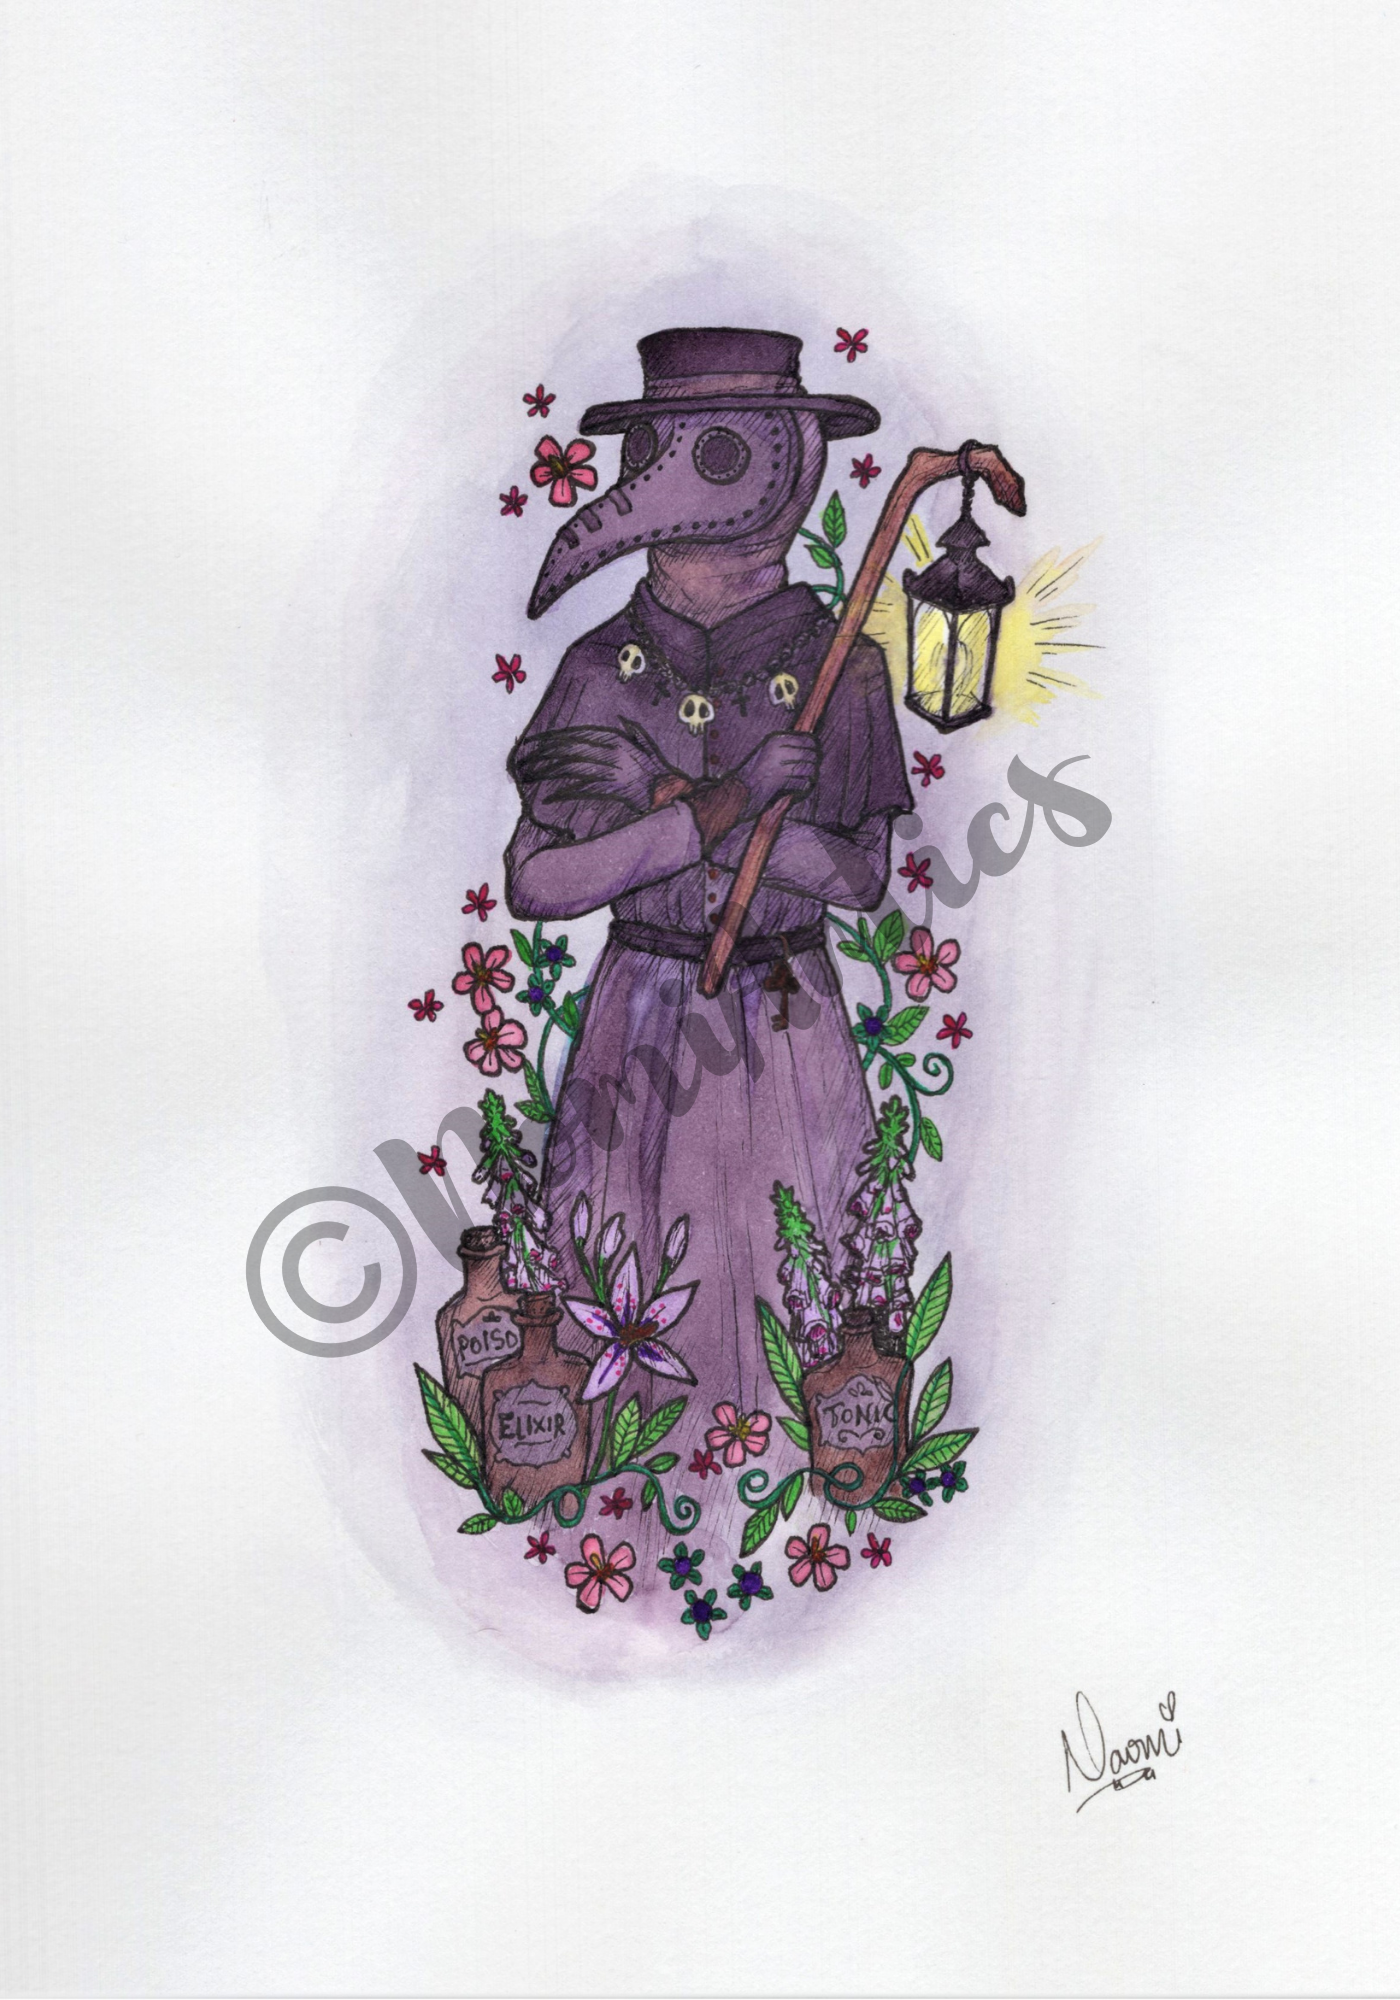 Plague Doctor Commission - SOLD